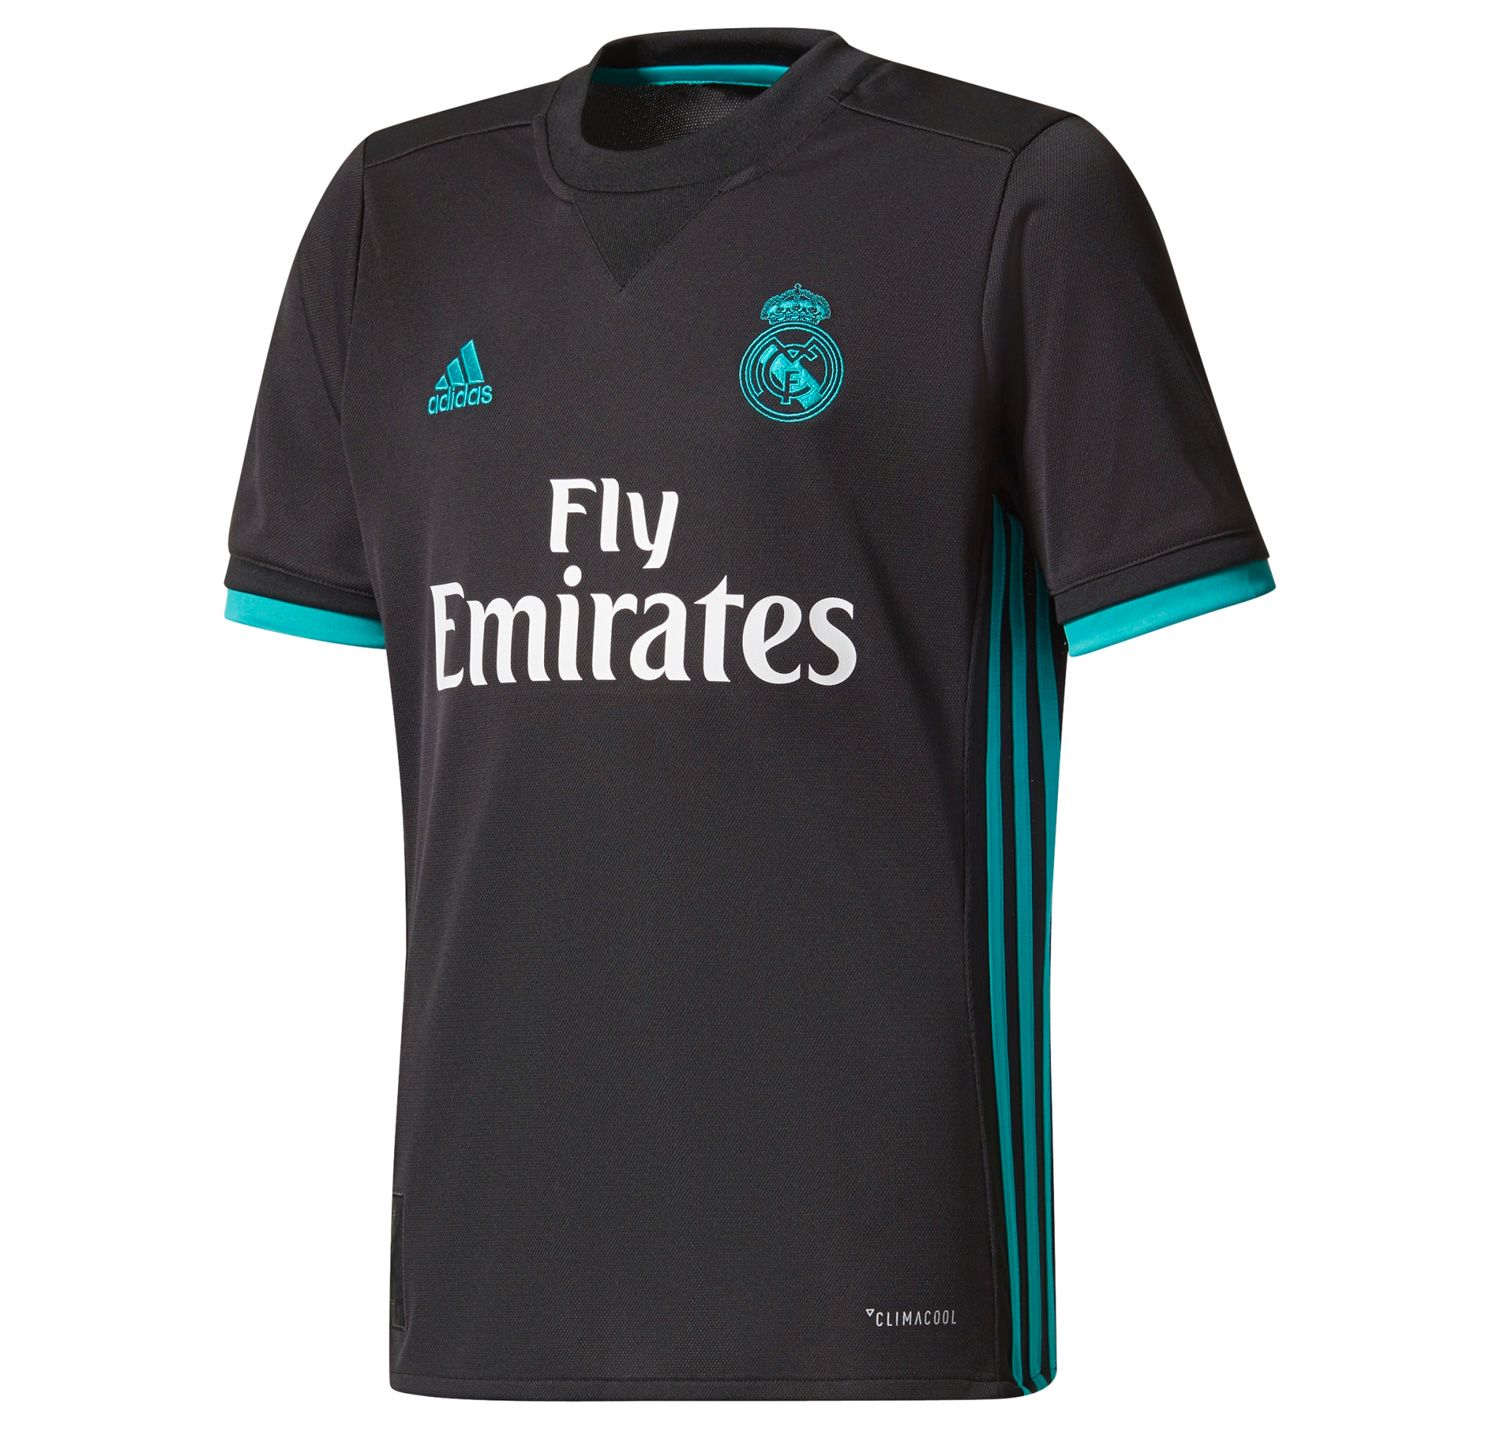 teal soccer jersey